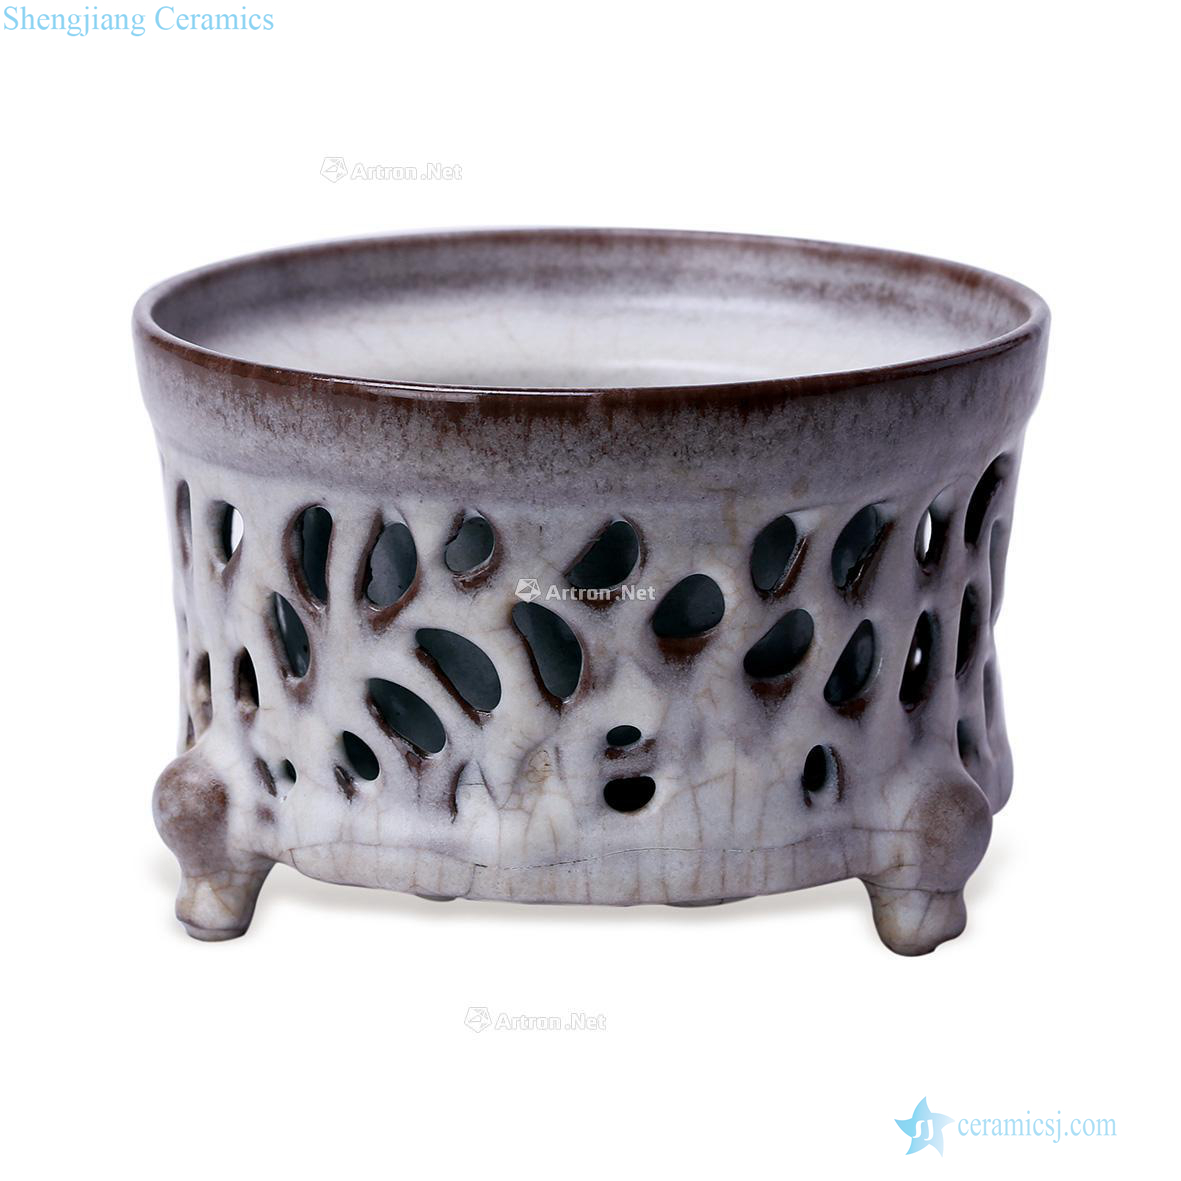 The song dynasty Your kiln craft jewelry box type furnace with three legs